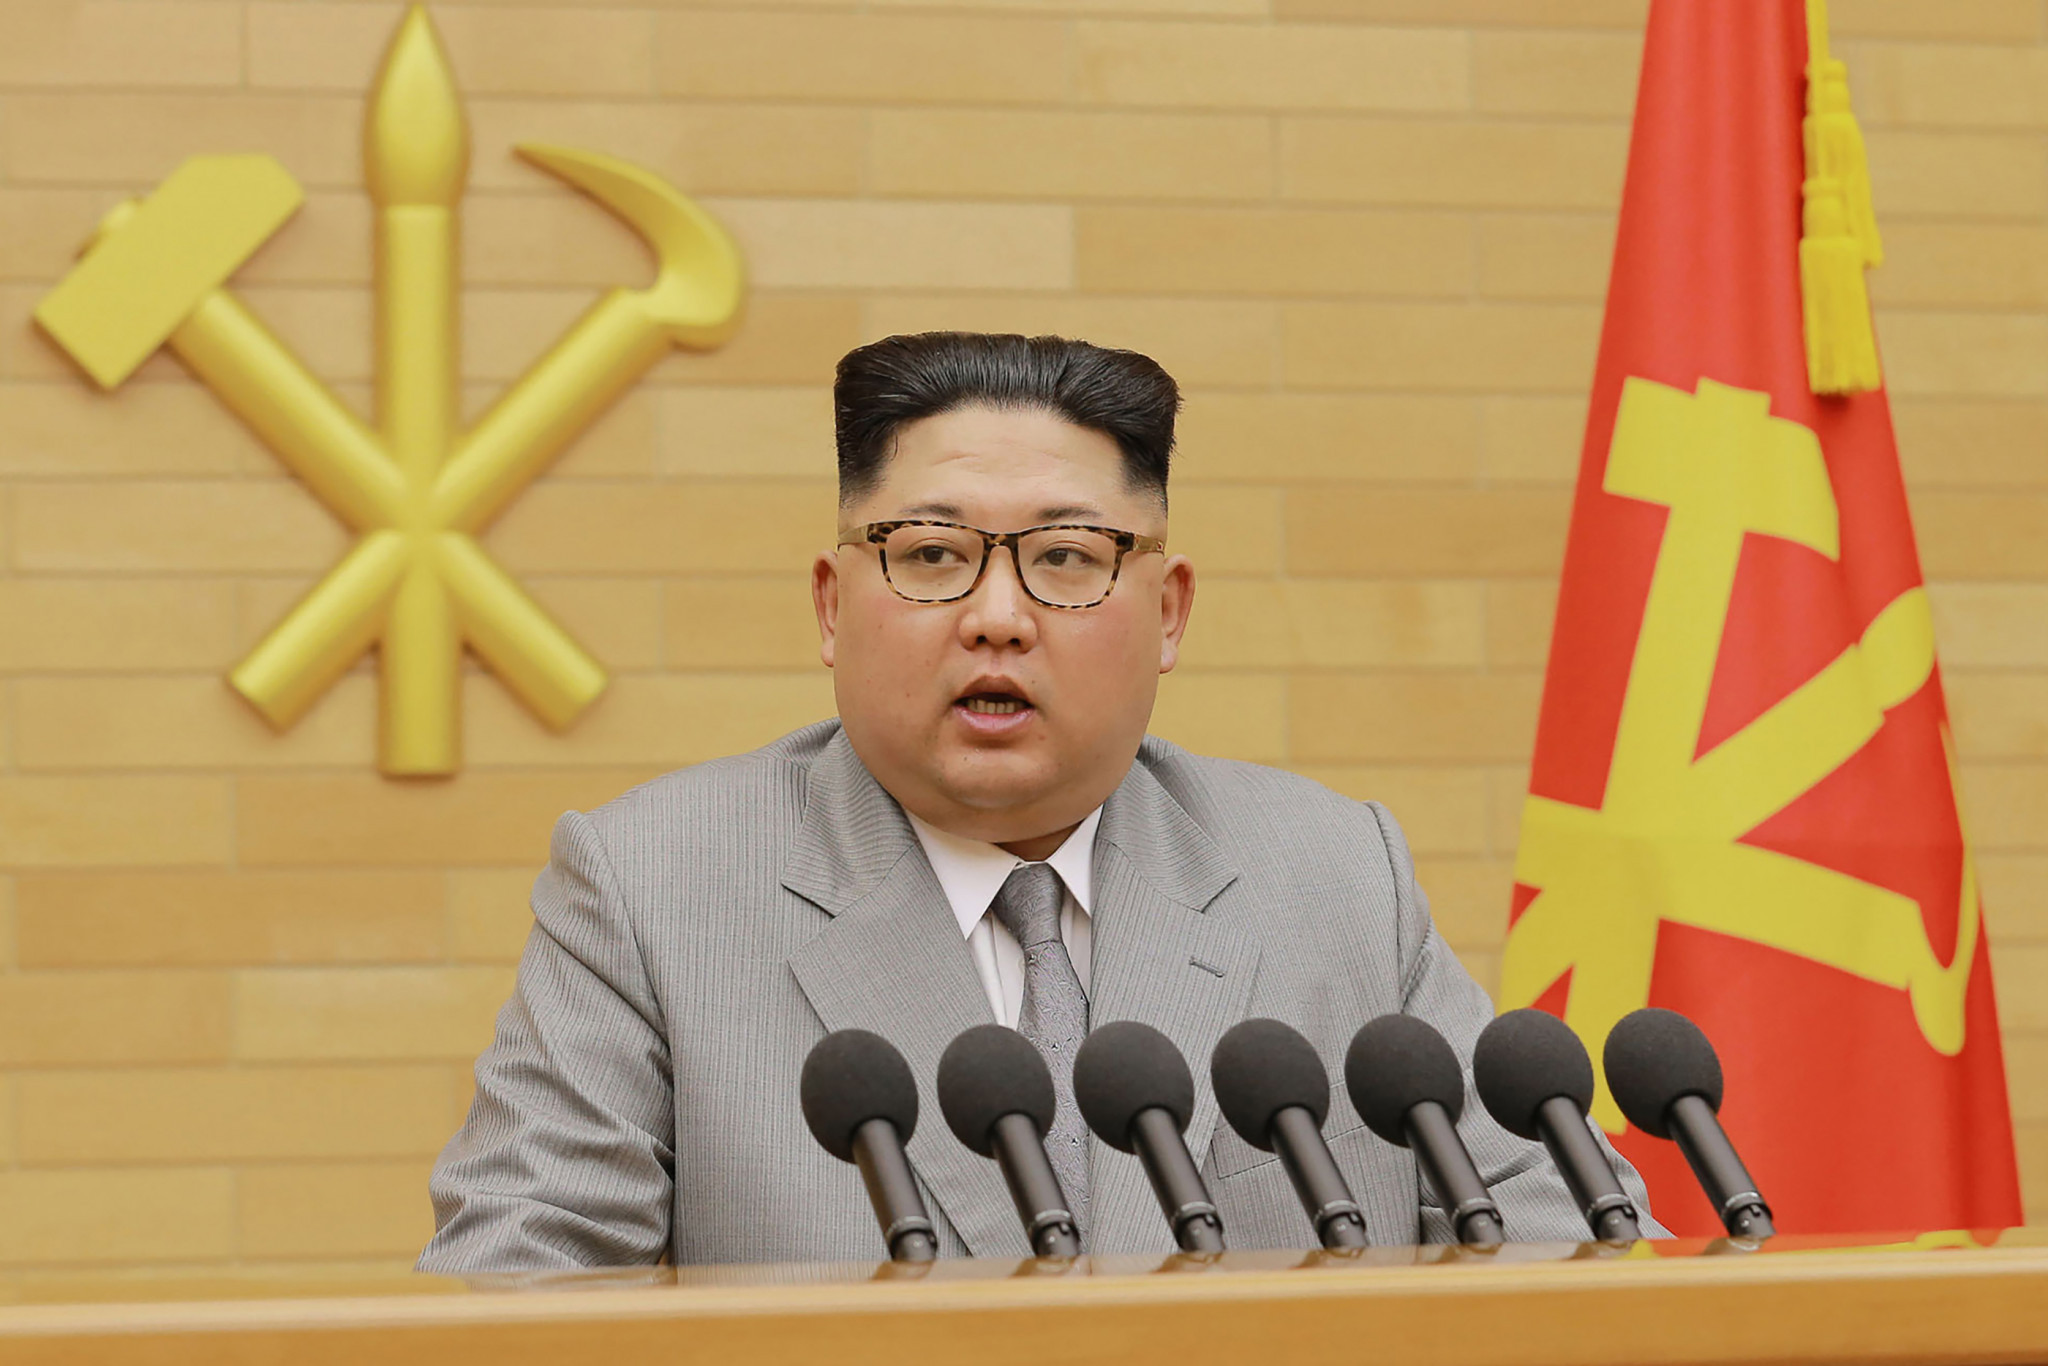 Kim Jong-un indicated plans to participate for the first time ©Getty Images